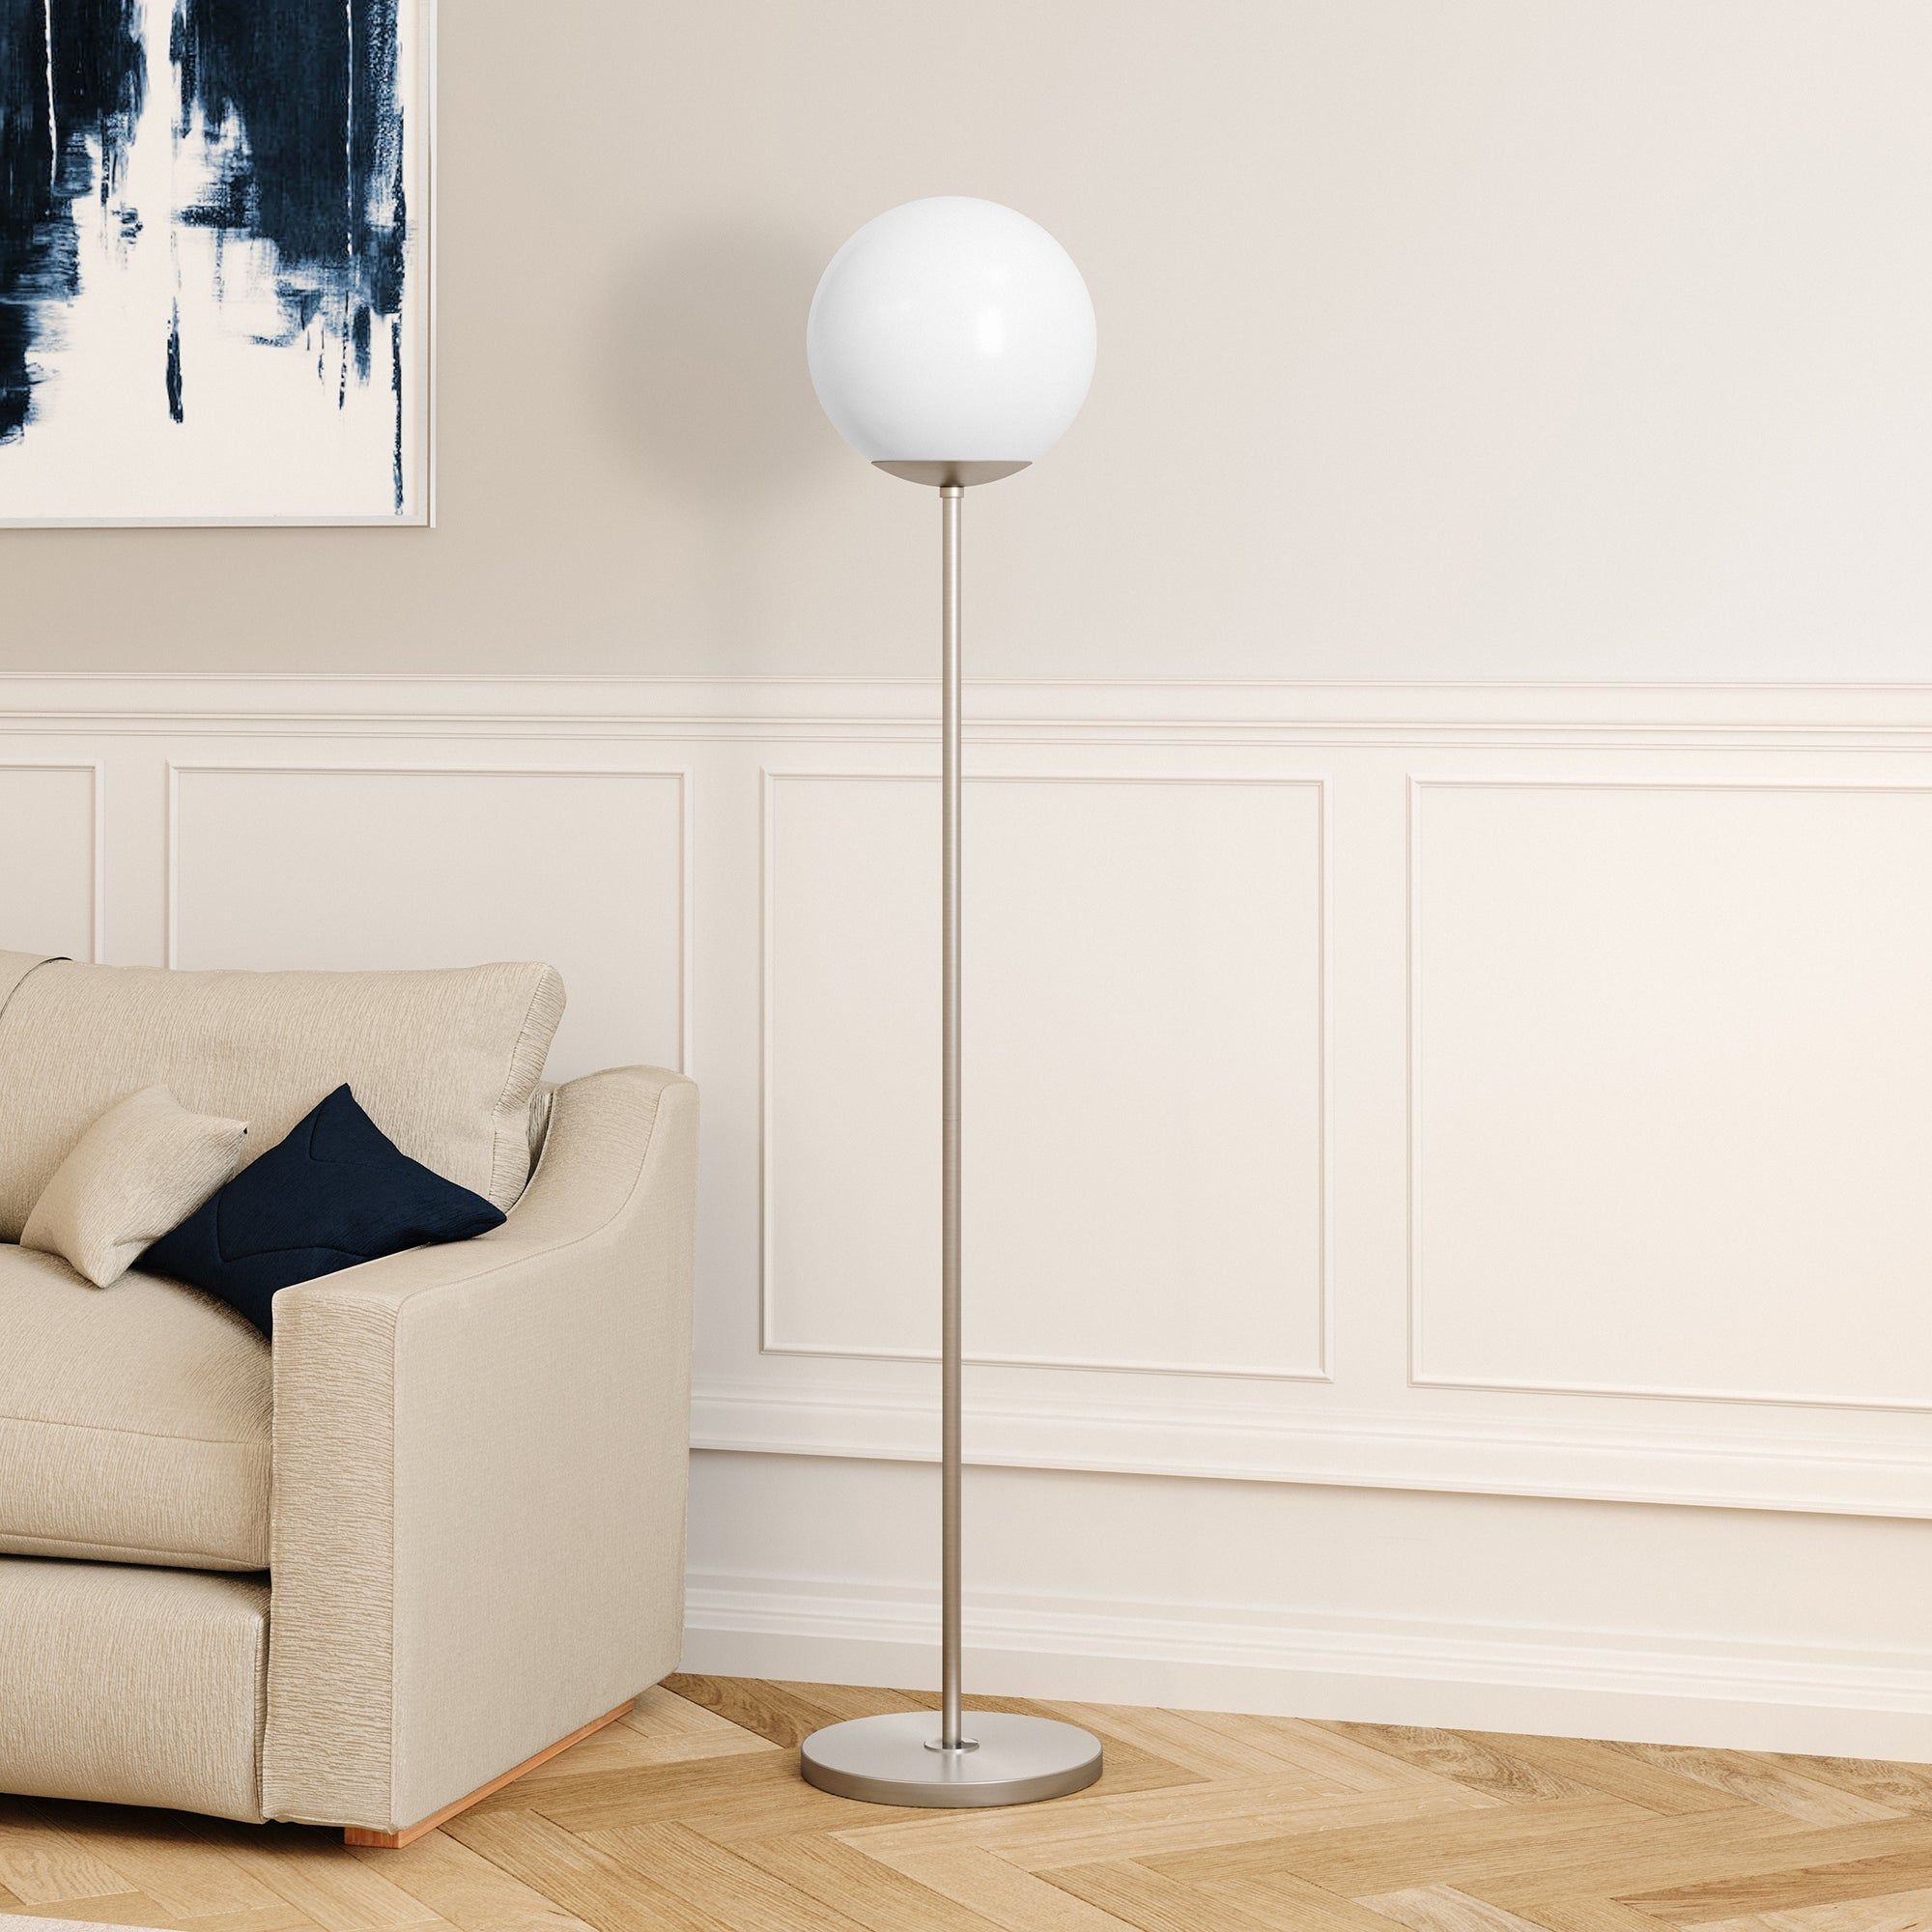 Theia Globe Shade Floor Lamp – On Sale – Overstock – 23572461 With Globe Floor Lamps (View 3 of 15)